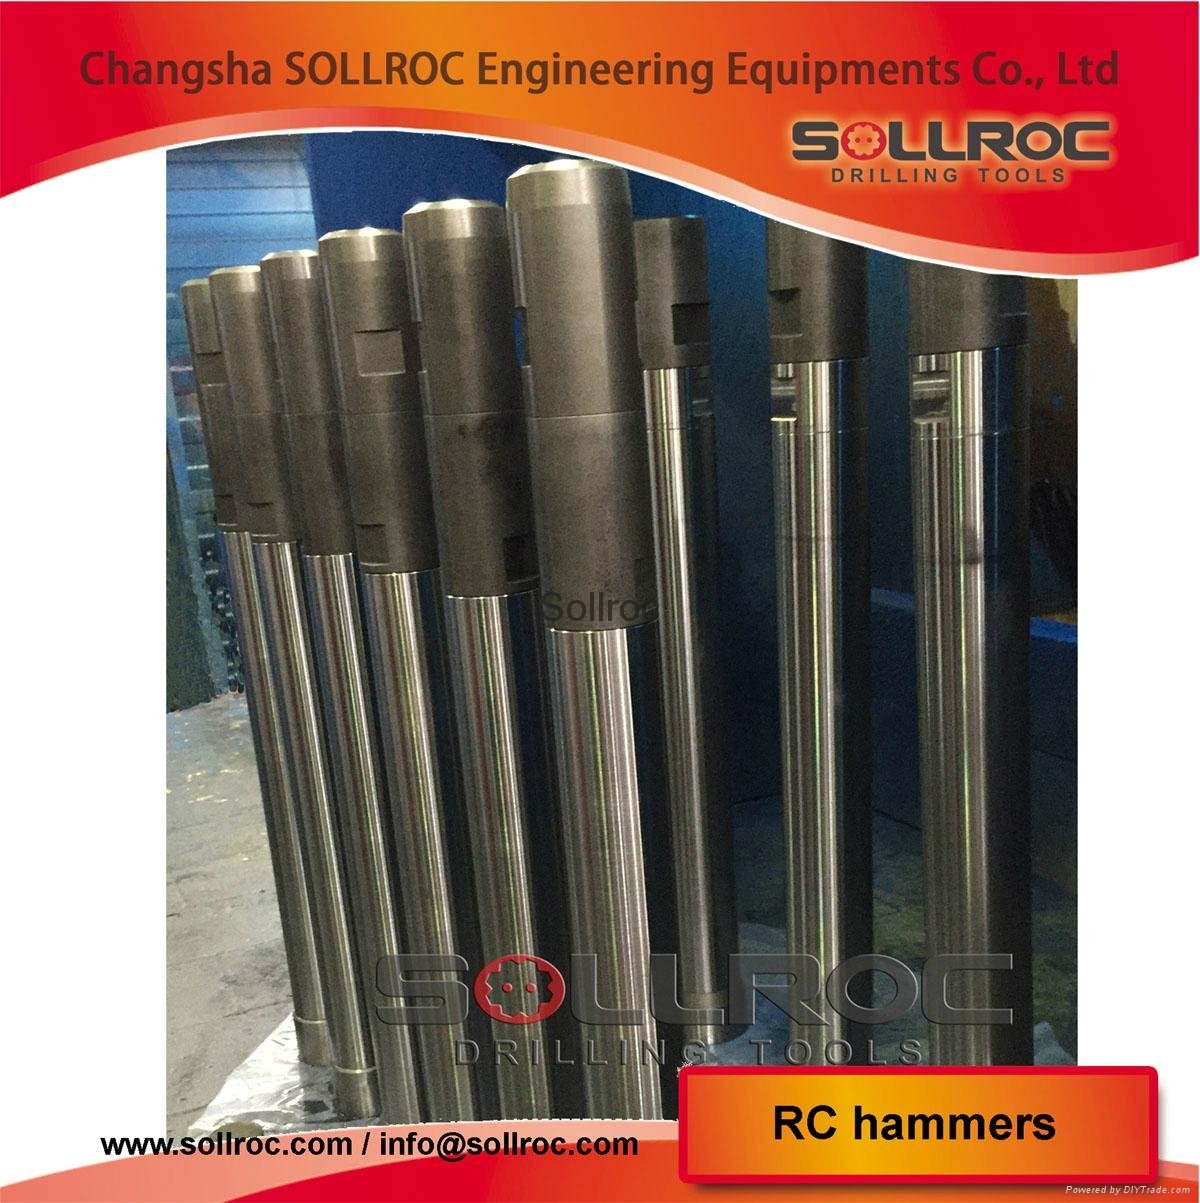 RC(Reverse Circluation) hammers and bits